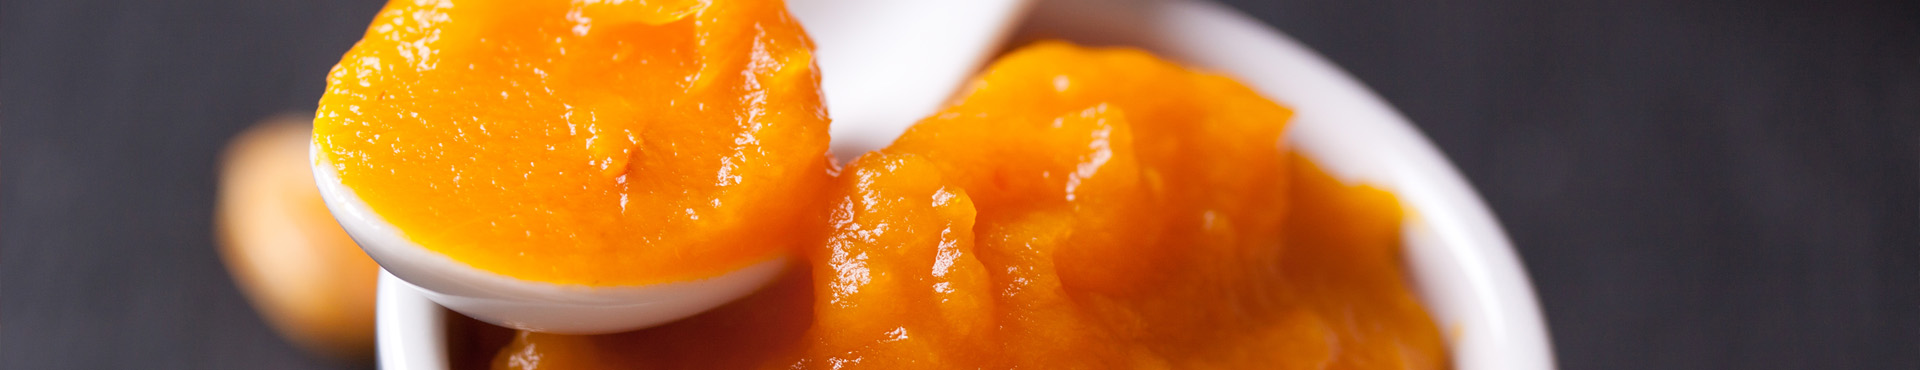 Explore Our Novelty: Peach, Apricot and Mango Fruit Paste! 